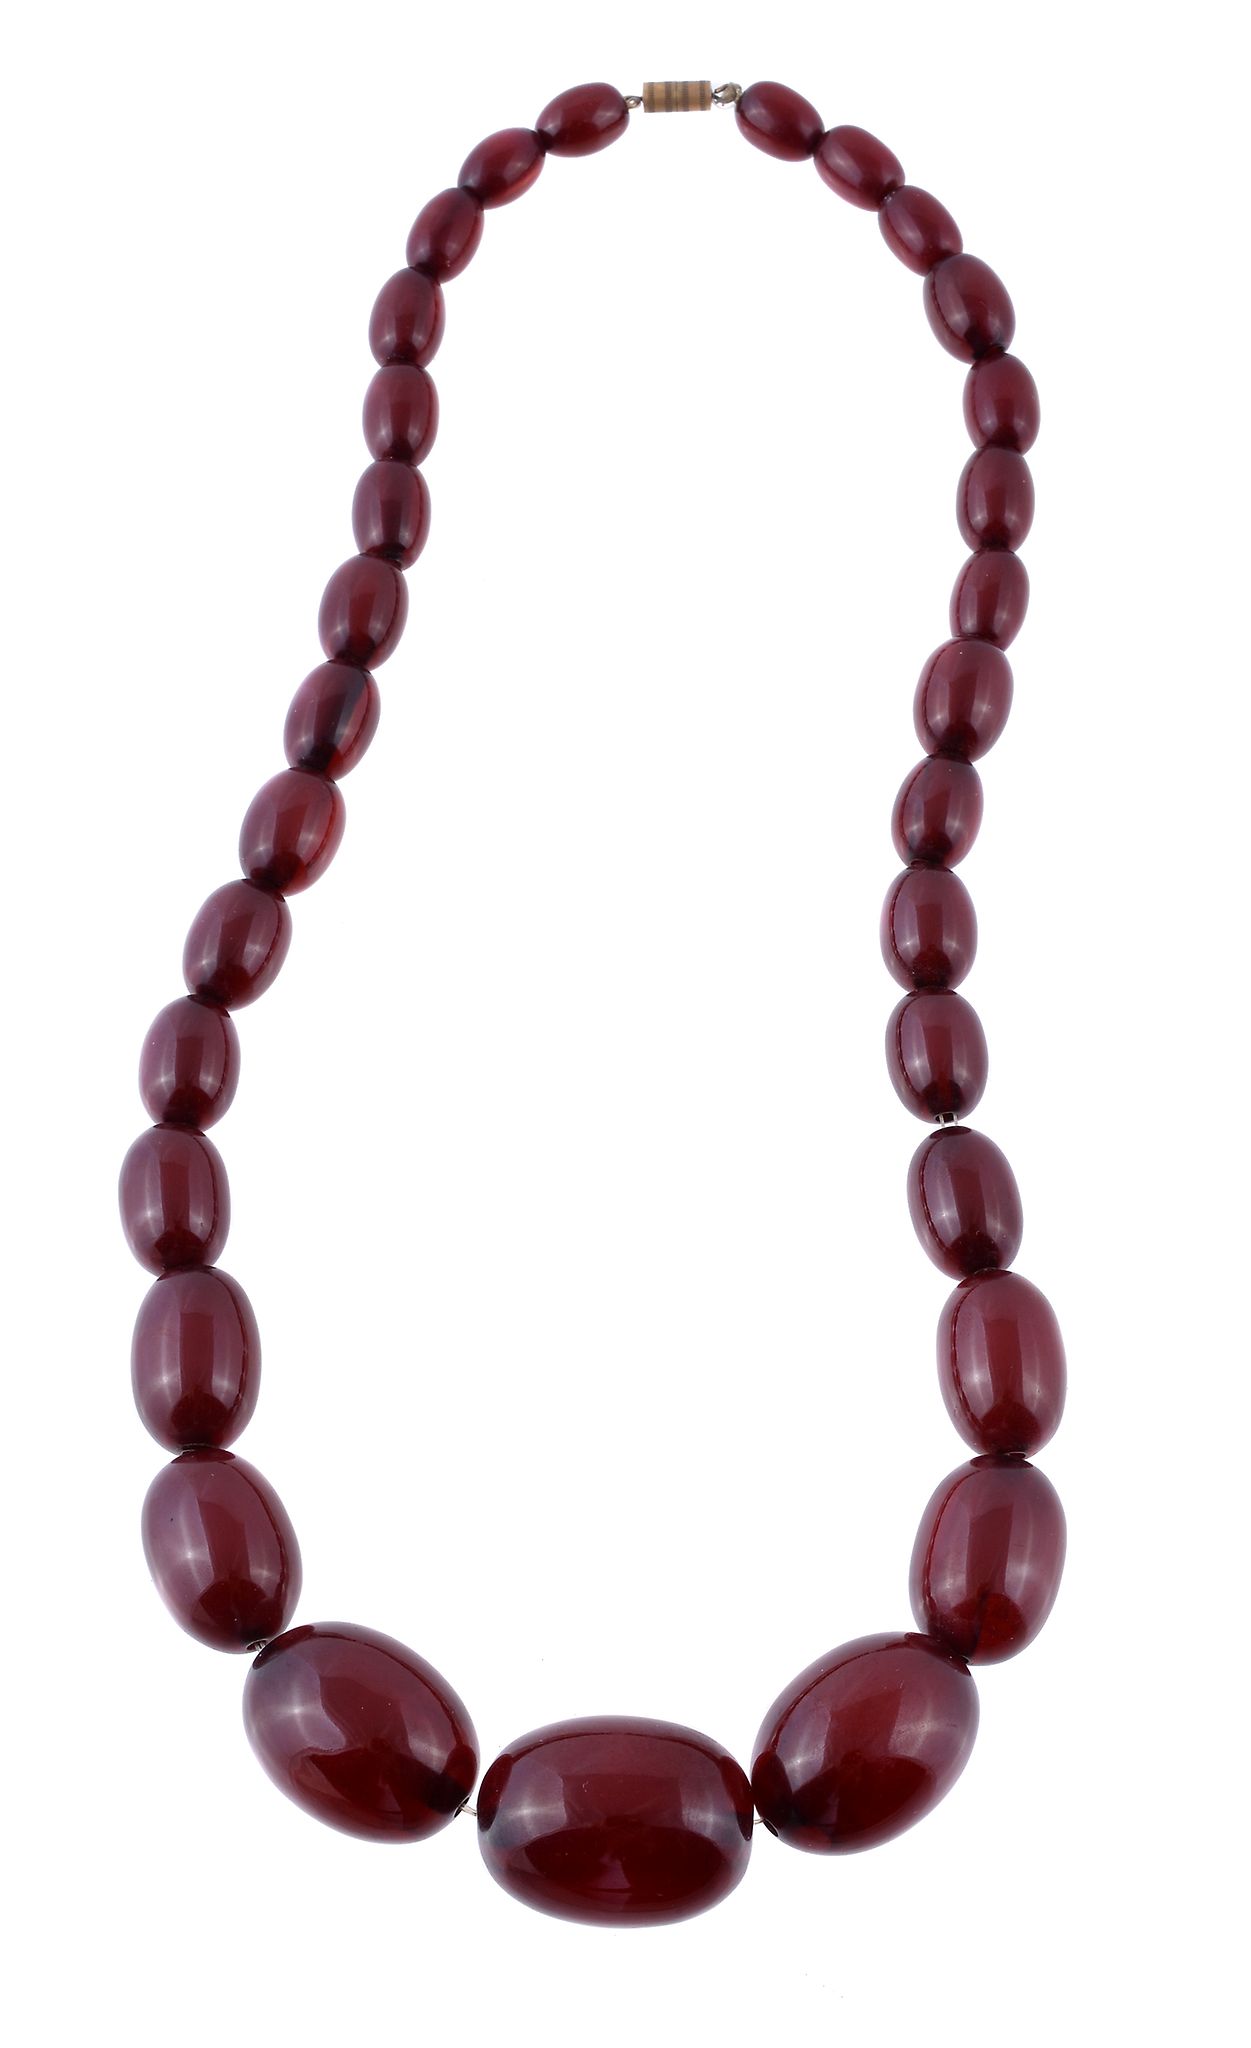 An amber bead necklace, composed of graduating 1.1cm to 2.9cm oval amber beads, with a screw clasp,